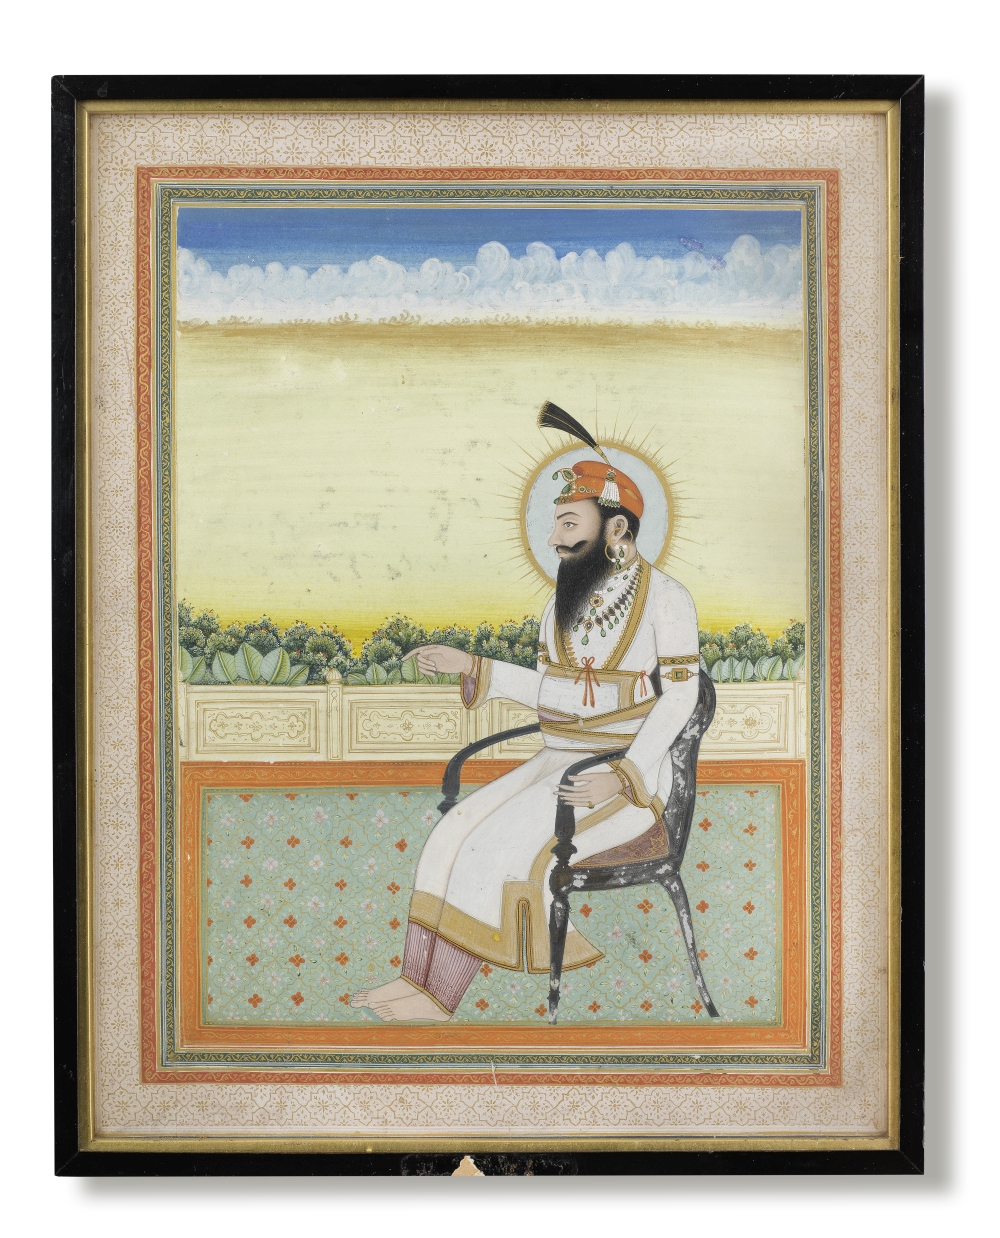 Swarup Singh, the Rajah of Jind (reg. 1834-64), seated on a terrace in a European-style chair, th...